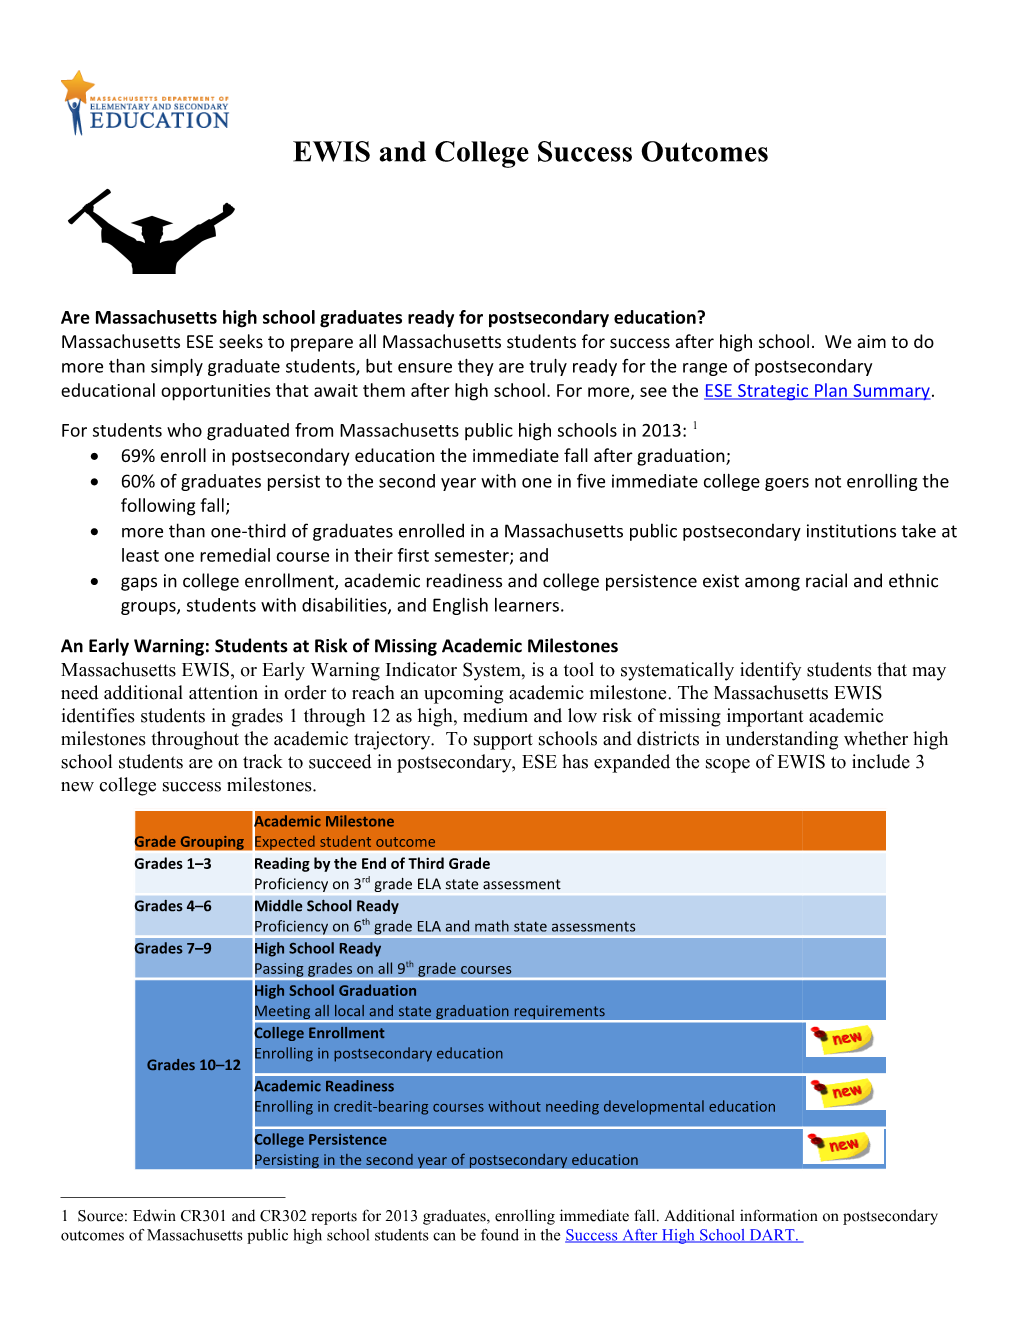 Introduction to the Expanded Post Secondary EWIS Model